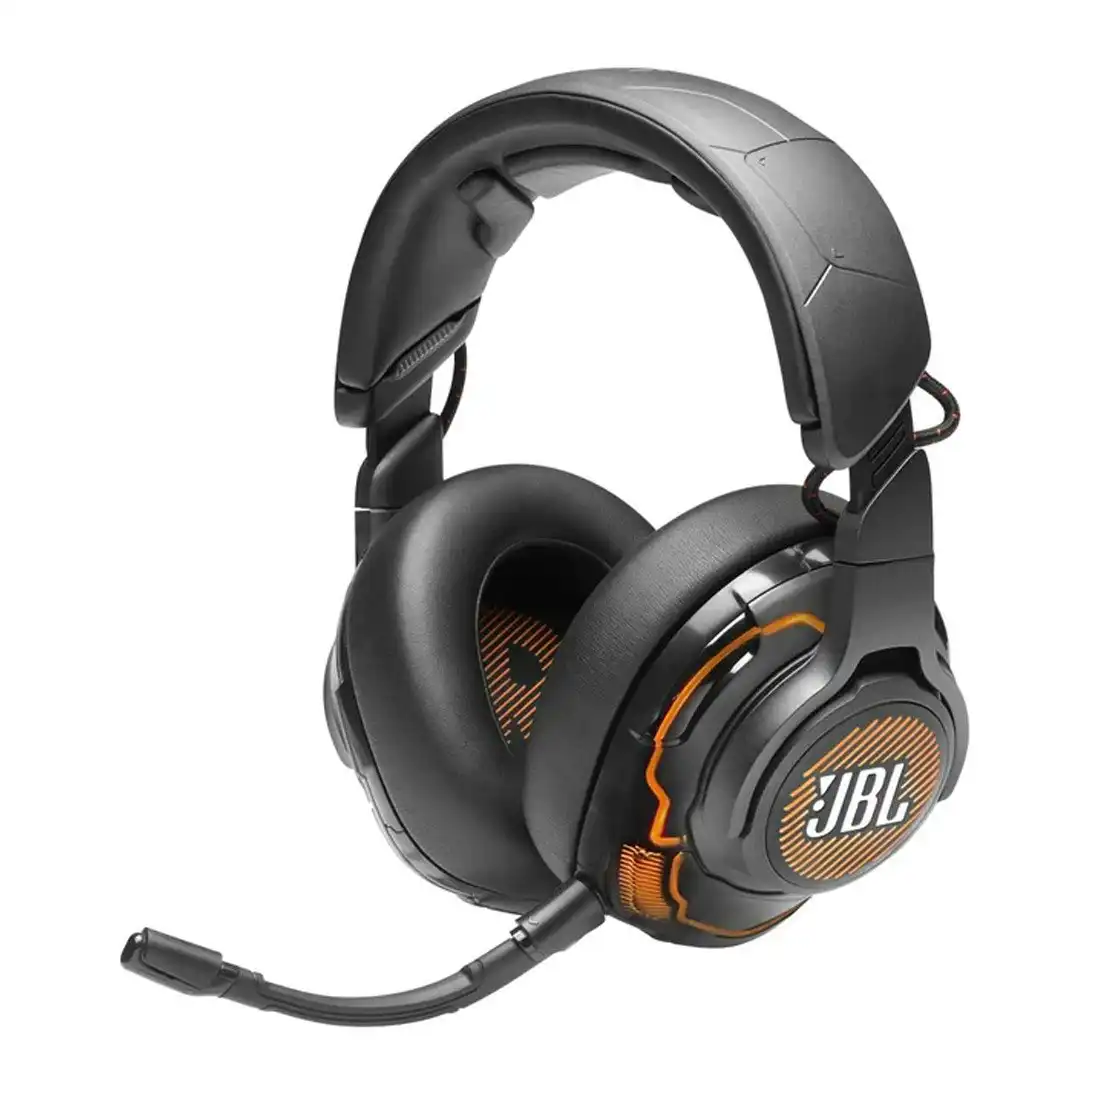 JBL Quantum One Wired Over-Ear Professional PC Gaming Headset - Black